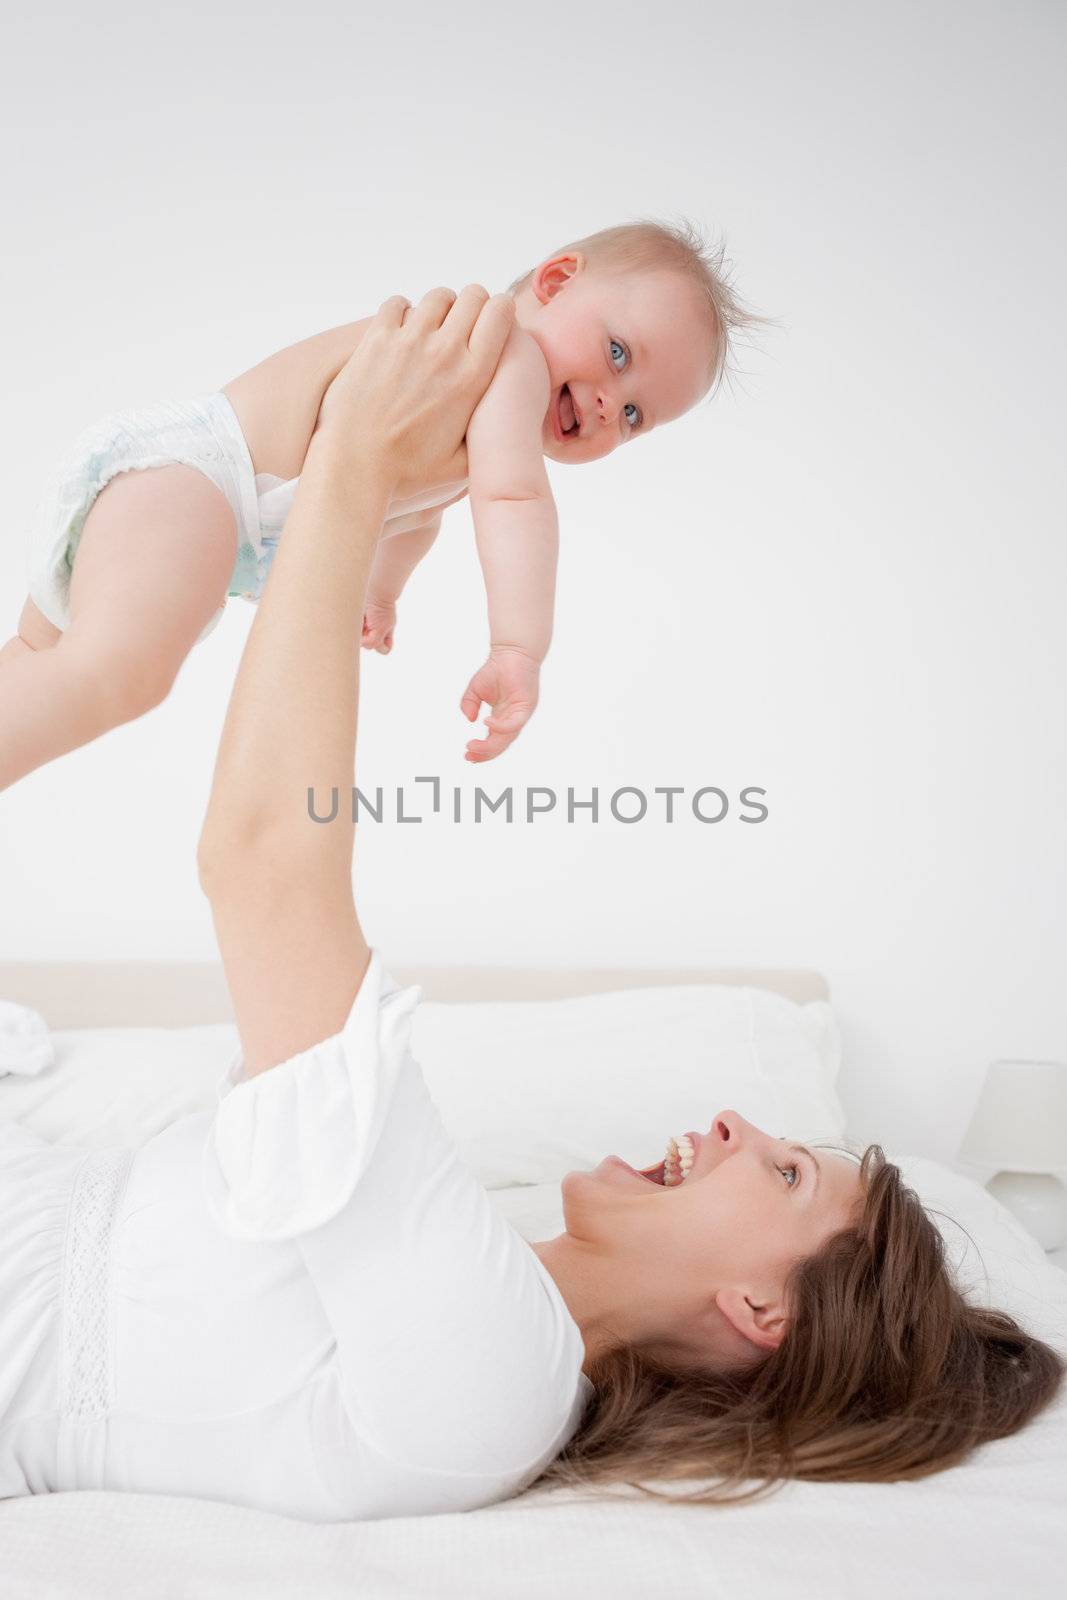 Happy woman holding her baby while lying in a bedroom